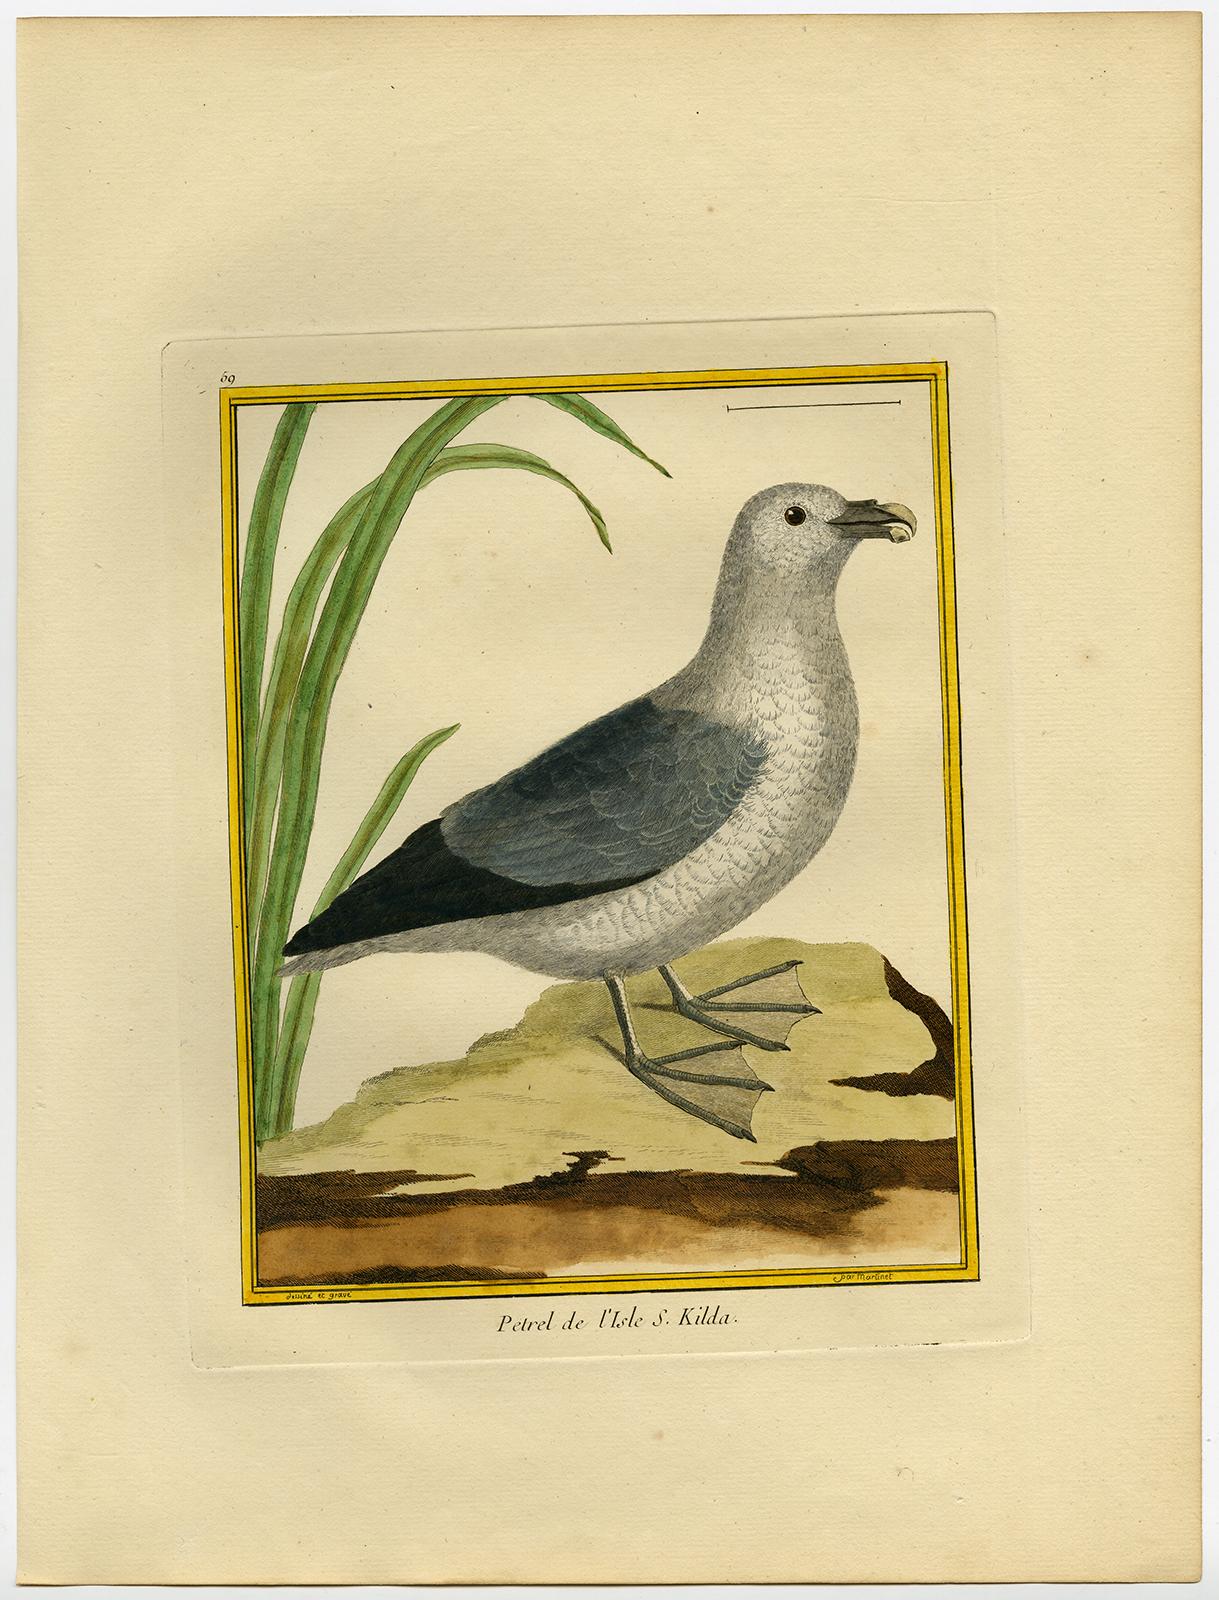 Northern Fulmar by Martinet - Handcoloured engraving - 18th century - Print by Francois Nicolas Martinet